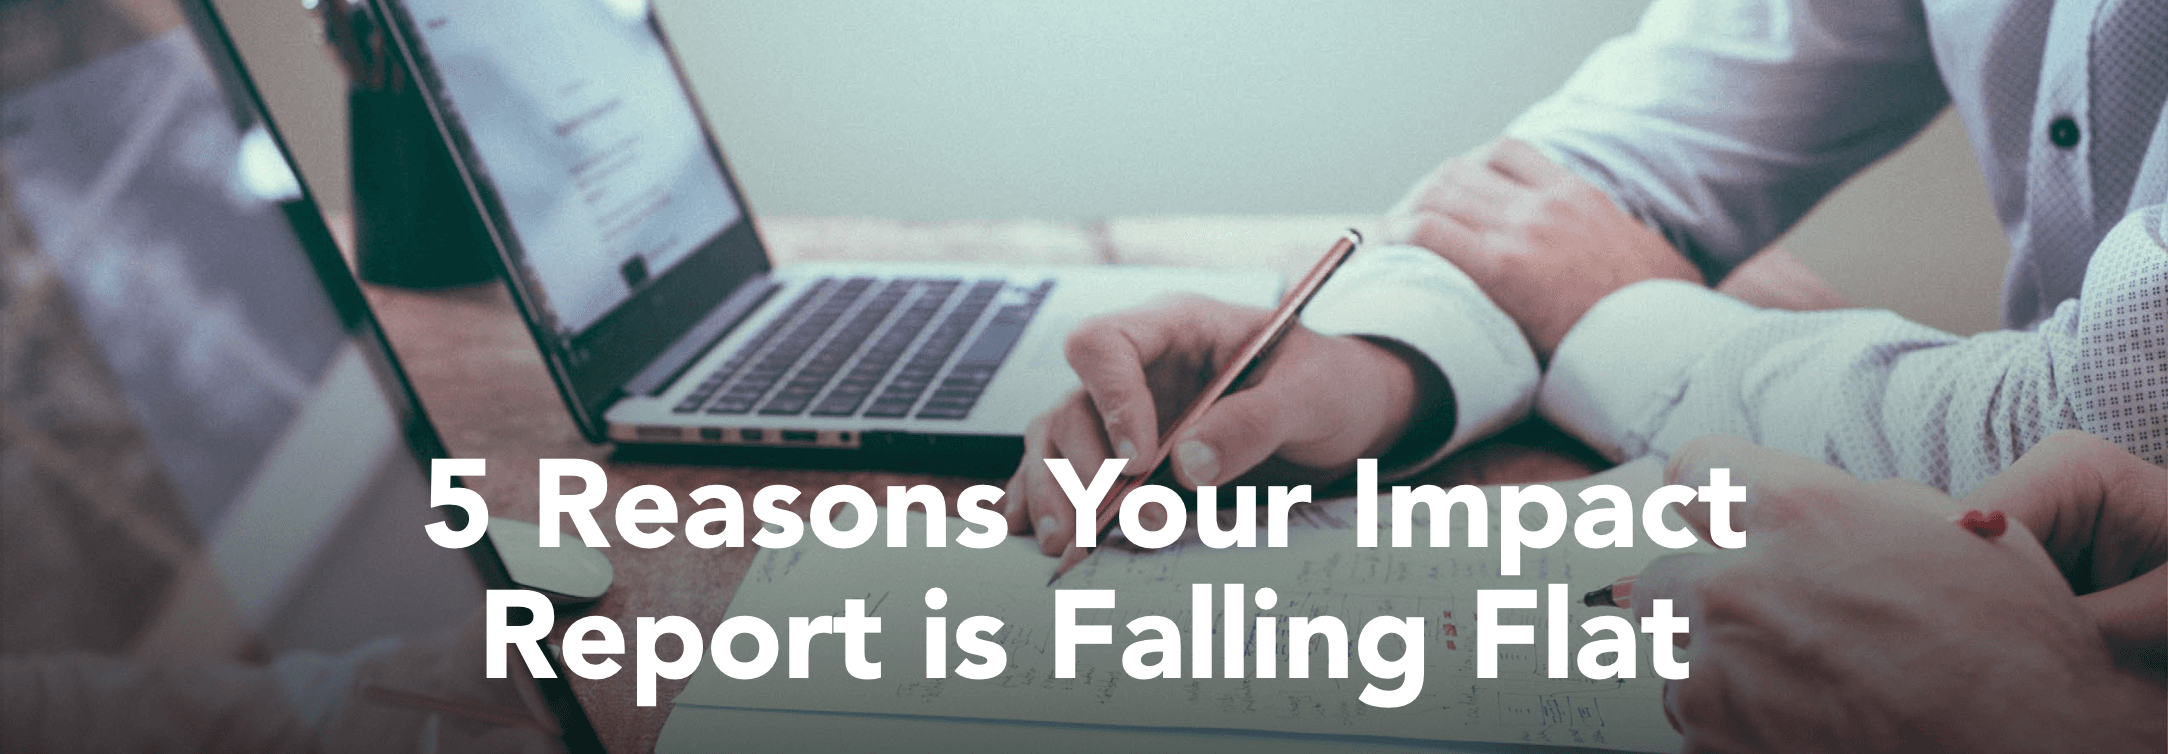 5 Reasons Your Impact Report is Falling Flat 